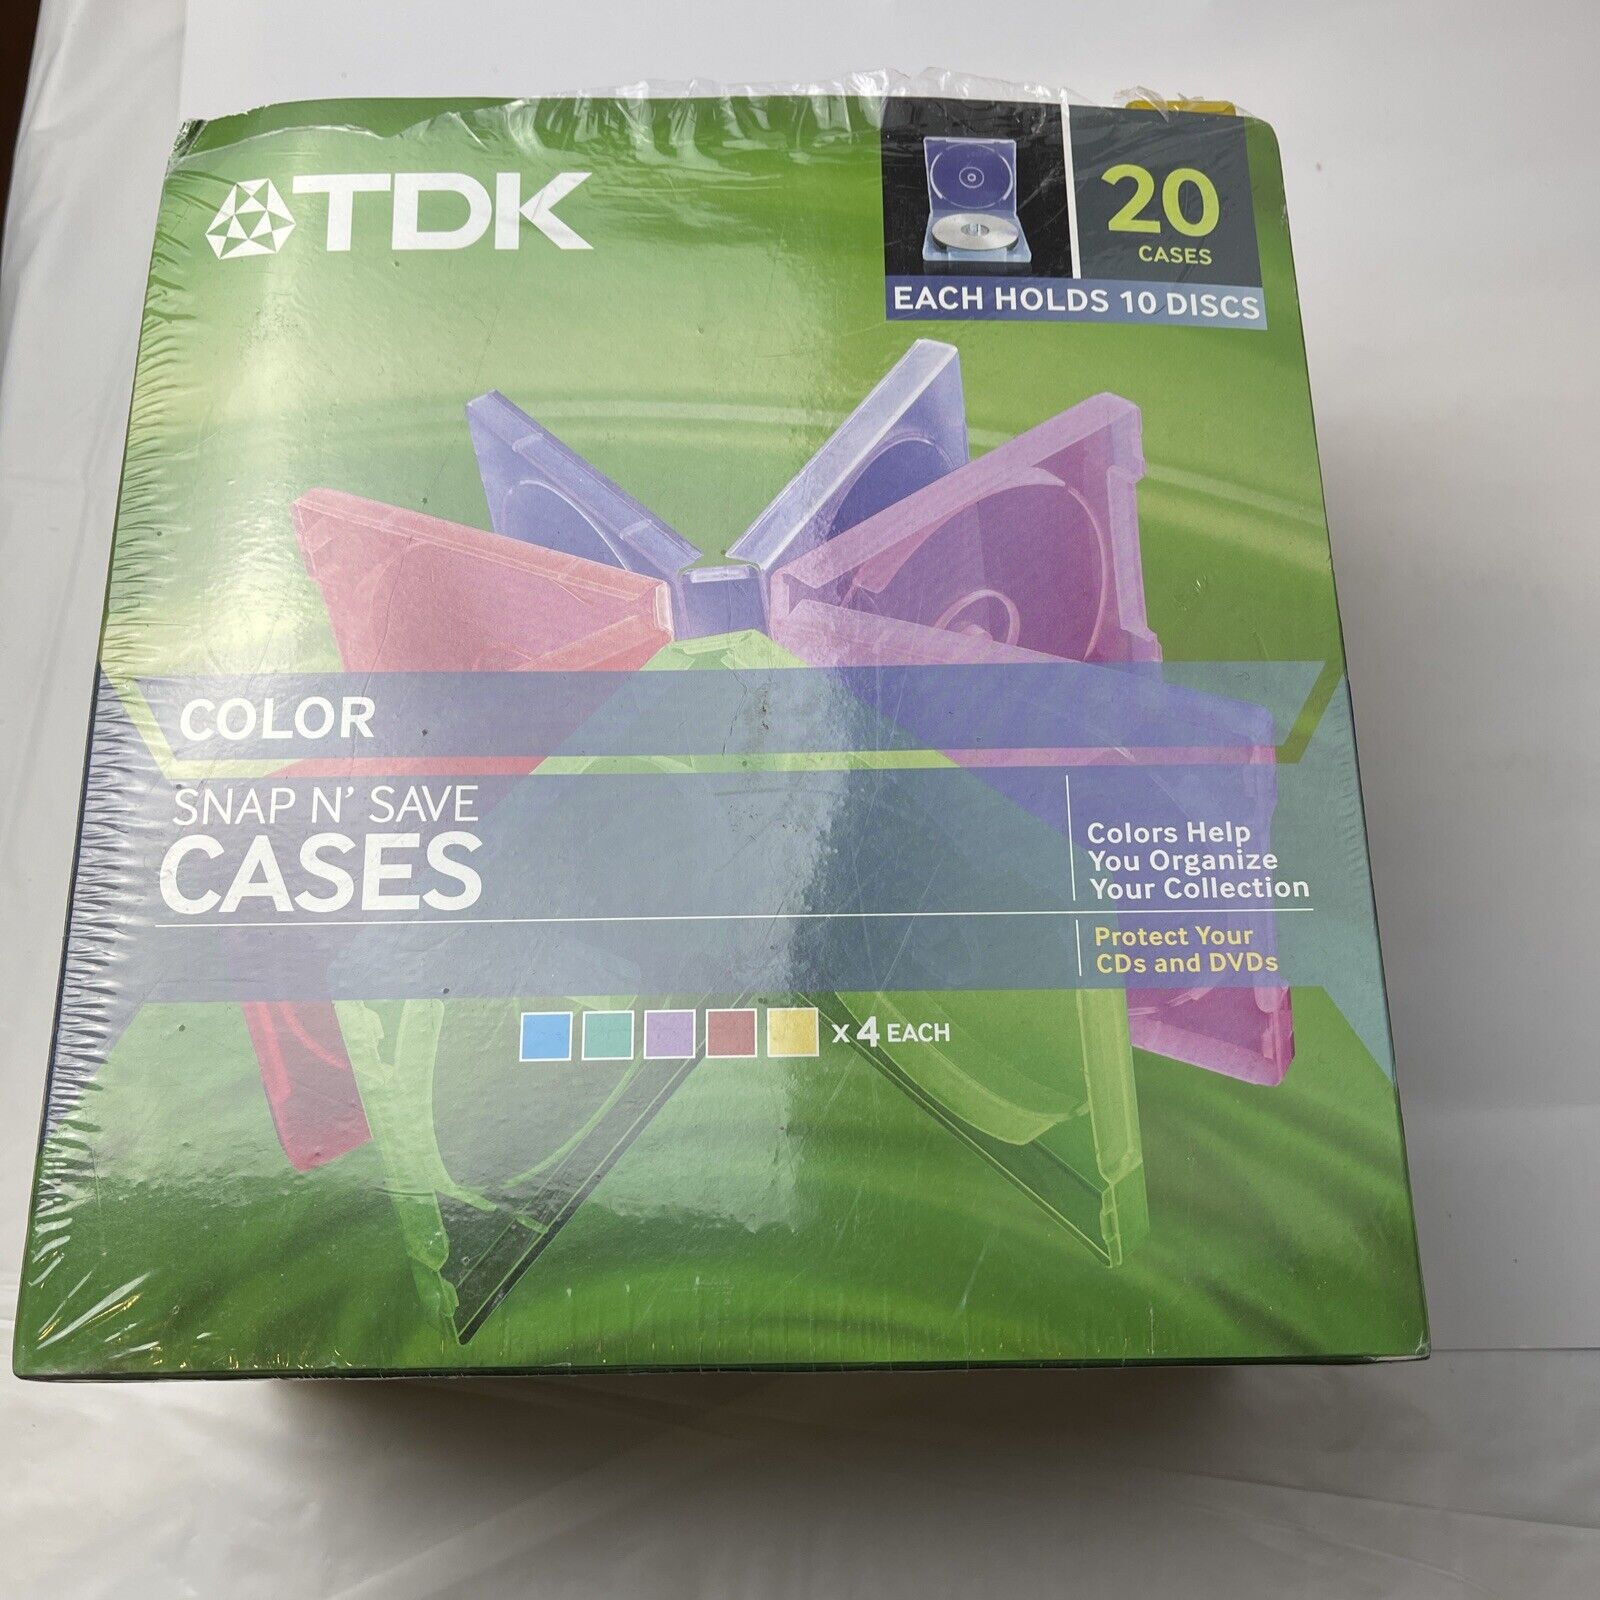 TDK Color CD Cases 20 19 -1 Blue OneMissing Jewel Cases New Compact Discs